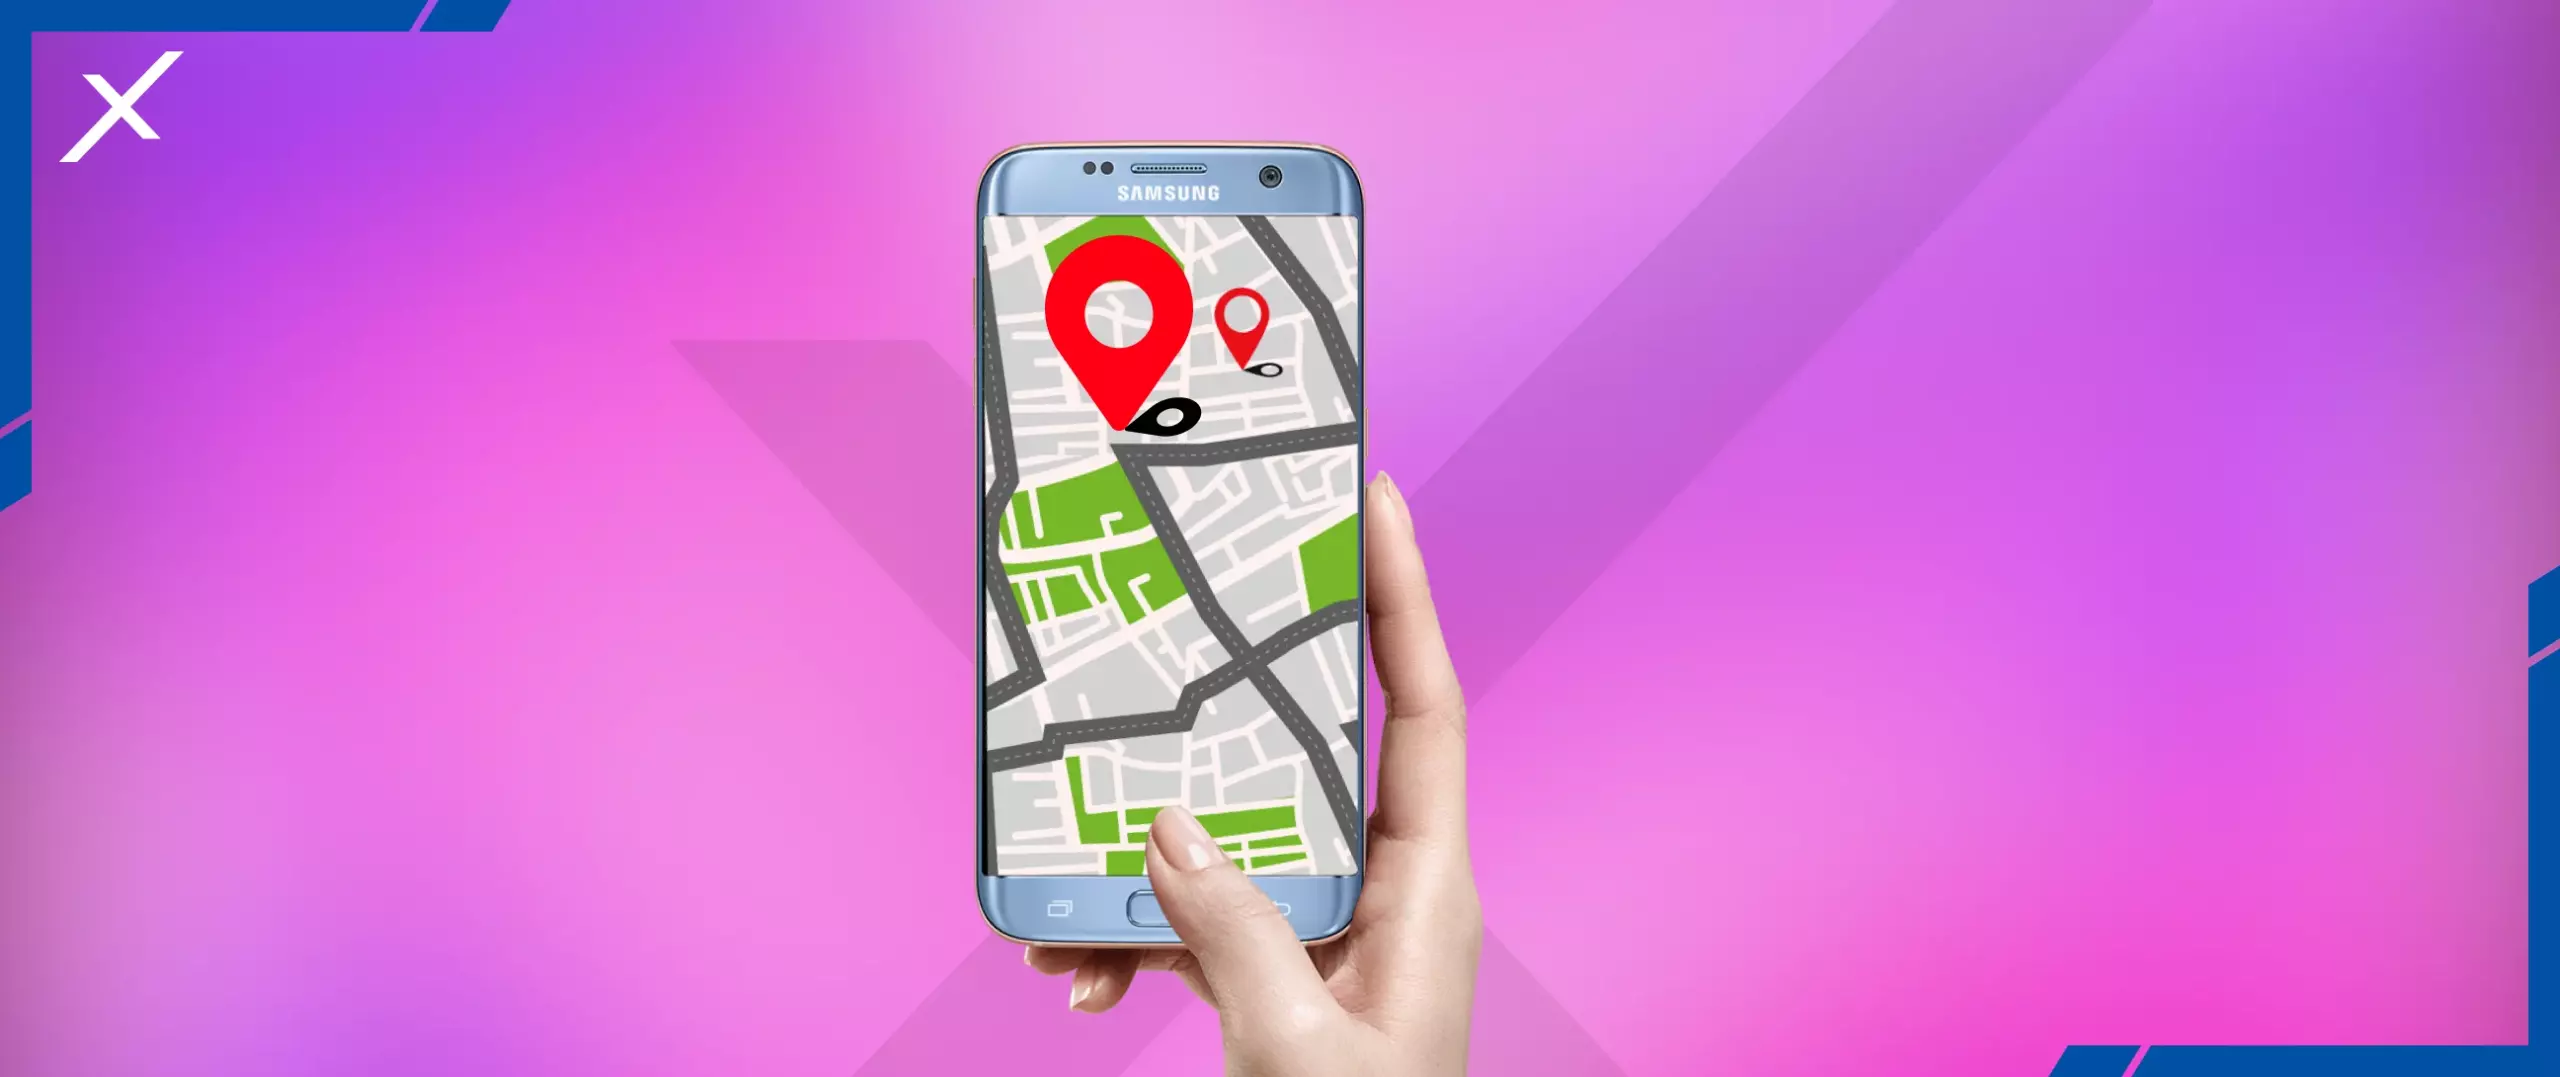  5 Legal Ways to Track Someone Location on Samsung Phone